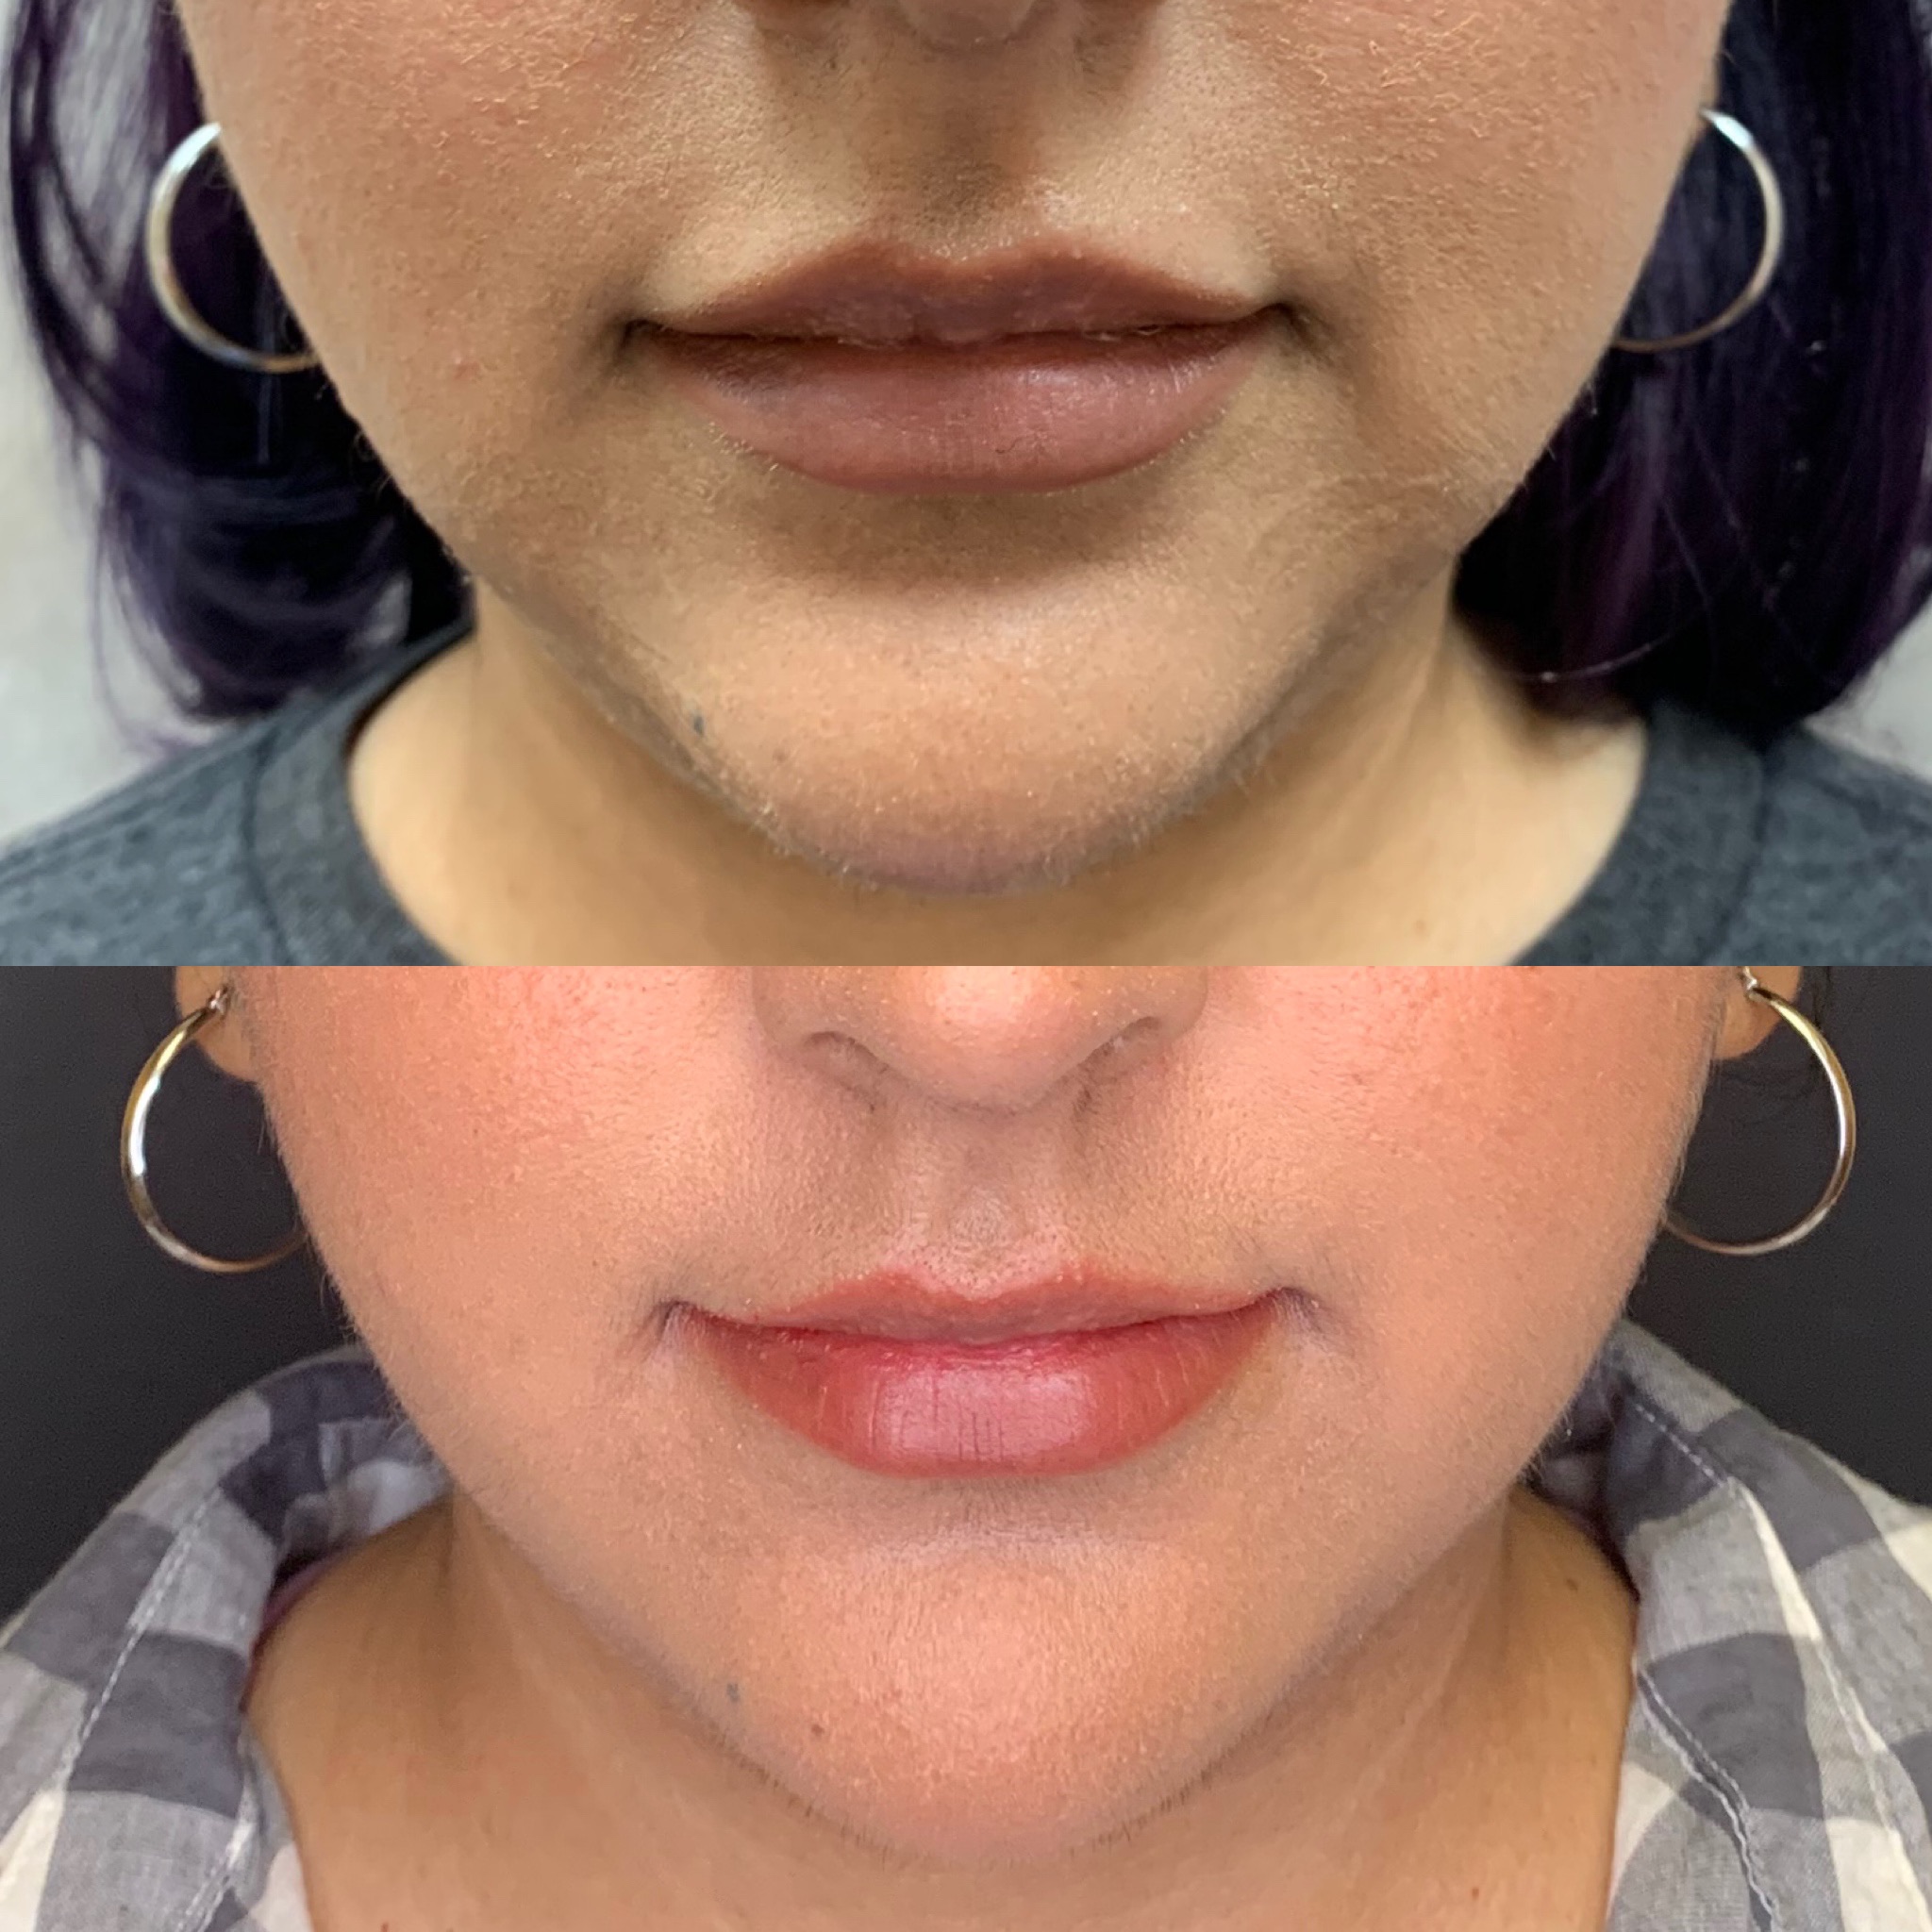 Before and After Marionettes Treatment | Beauty Boost Med Spa in Newport Beach, CA